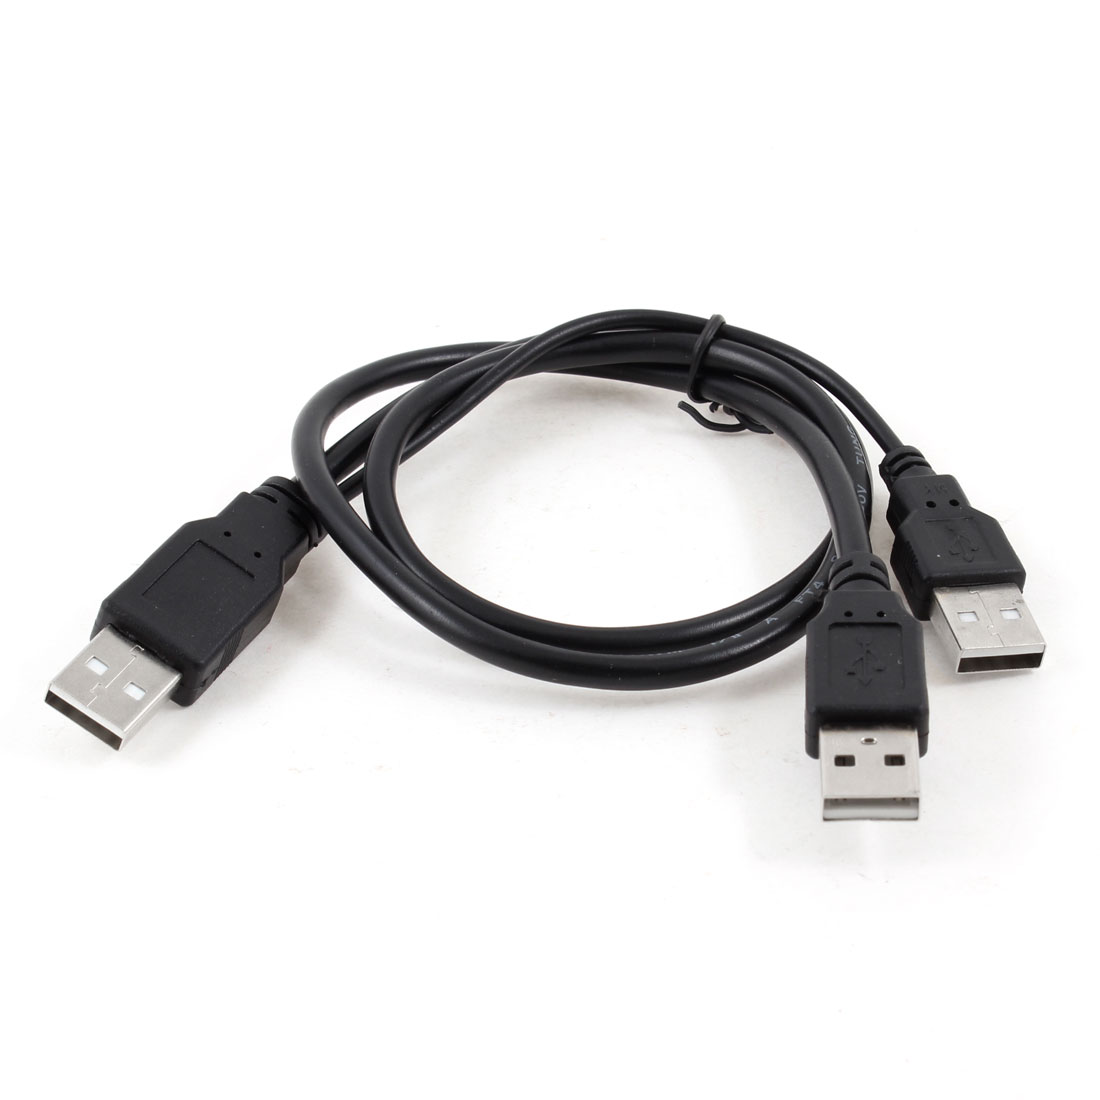 Unique Bargains Black USB 2.0 A Male to 2 x A Male M/M High Speed Data Charger Cable Lead 65cm